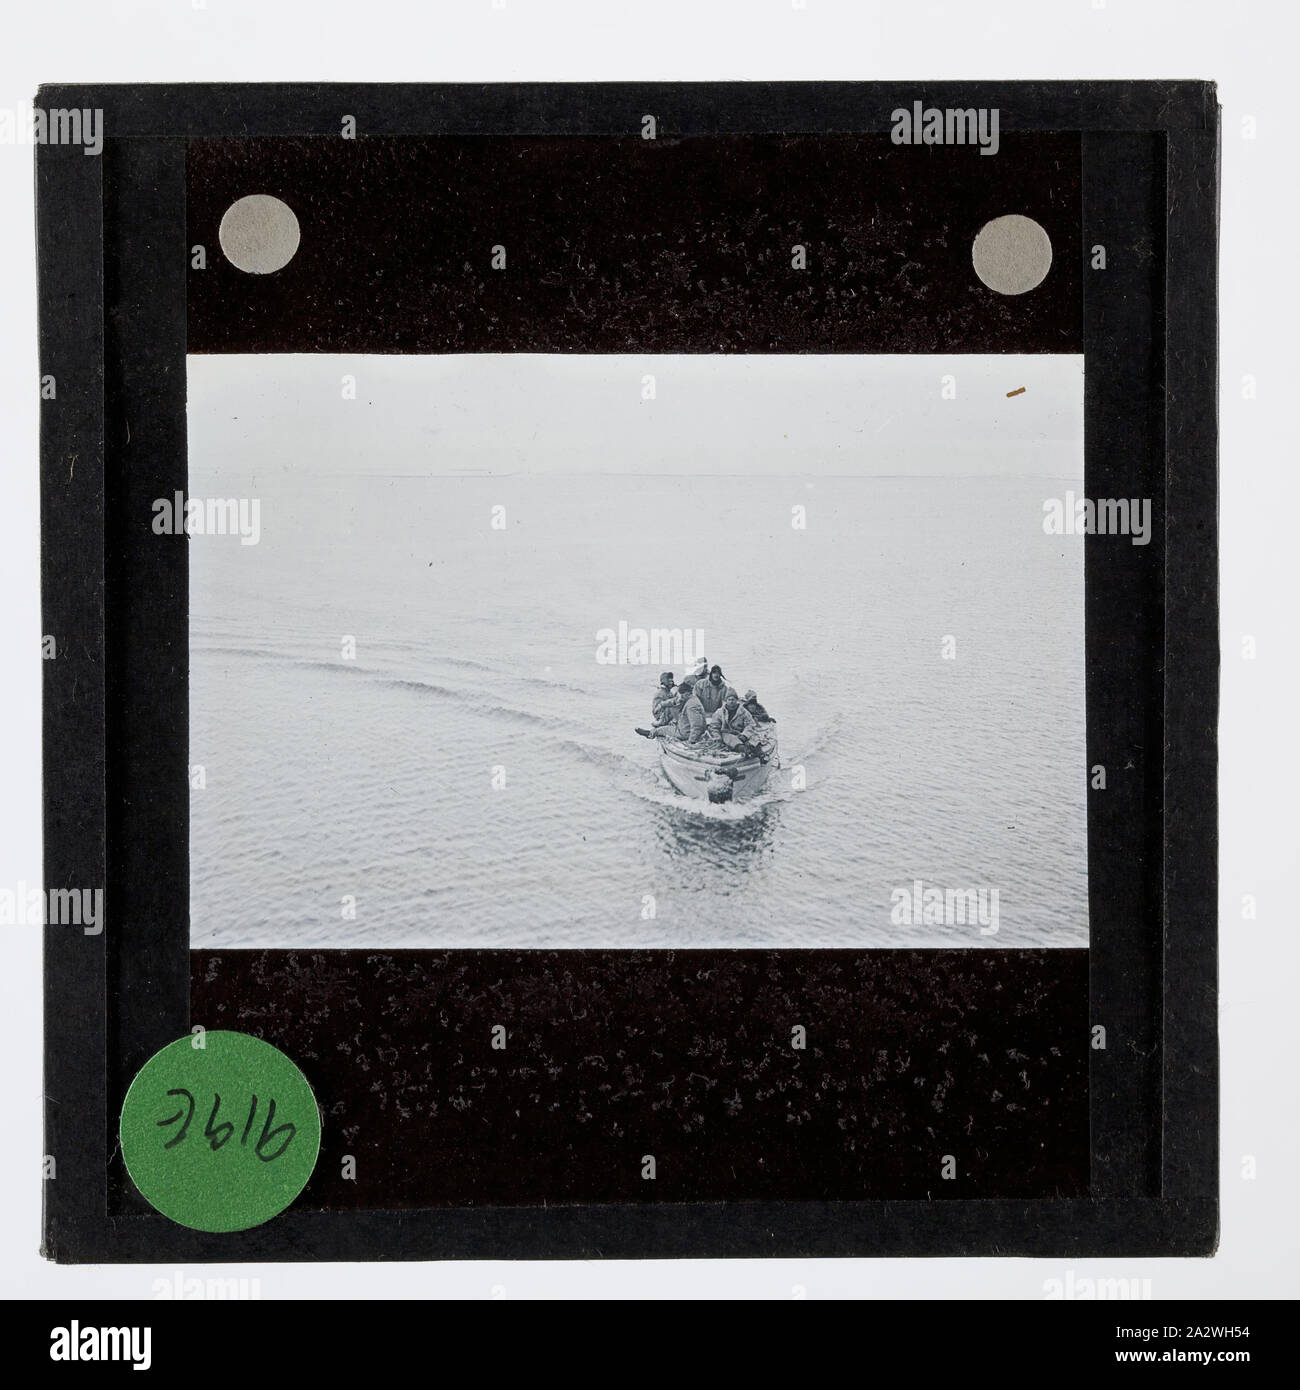 Lantern Slide - A Motor Boat Party from the Discovery II, Ellsworth Relief Expedition, Antarctica, 1935-1936, Lantern slide of a motor boat party from the ship Discovery II, Antarctica. One of 328 images in various formats including artworks, photographs, glass negatives and lantern slides Stock Photo